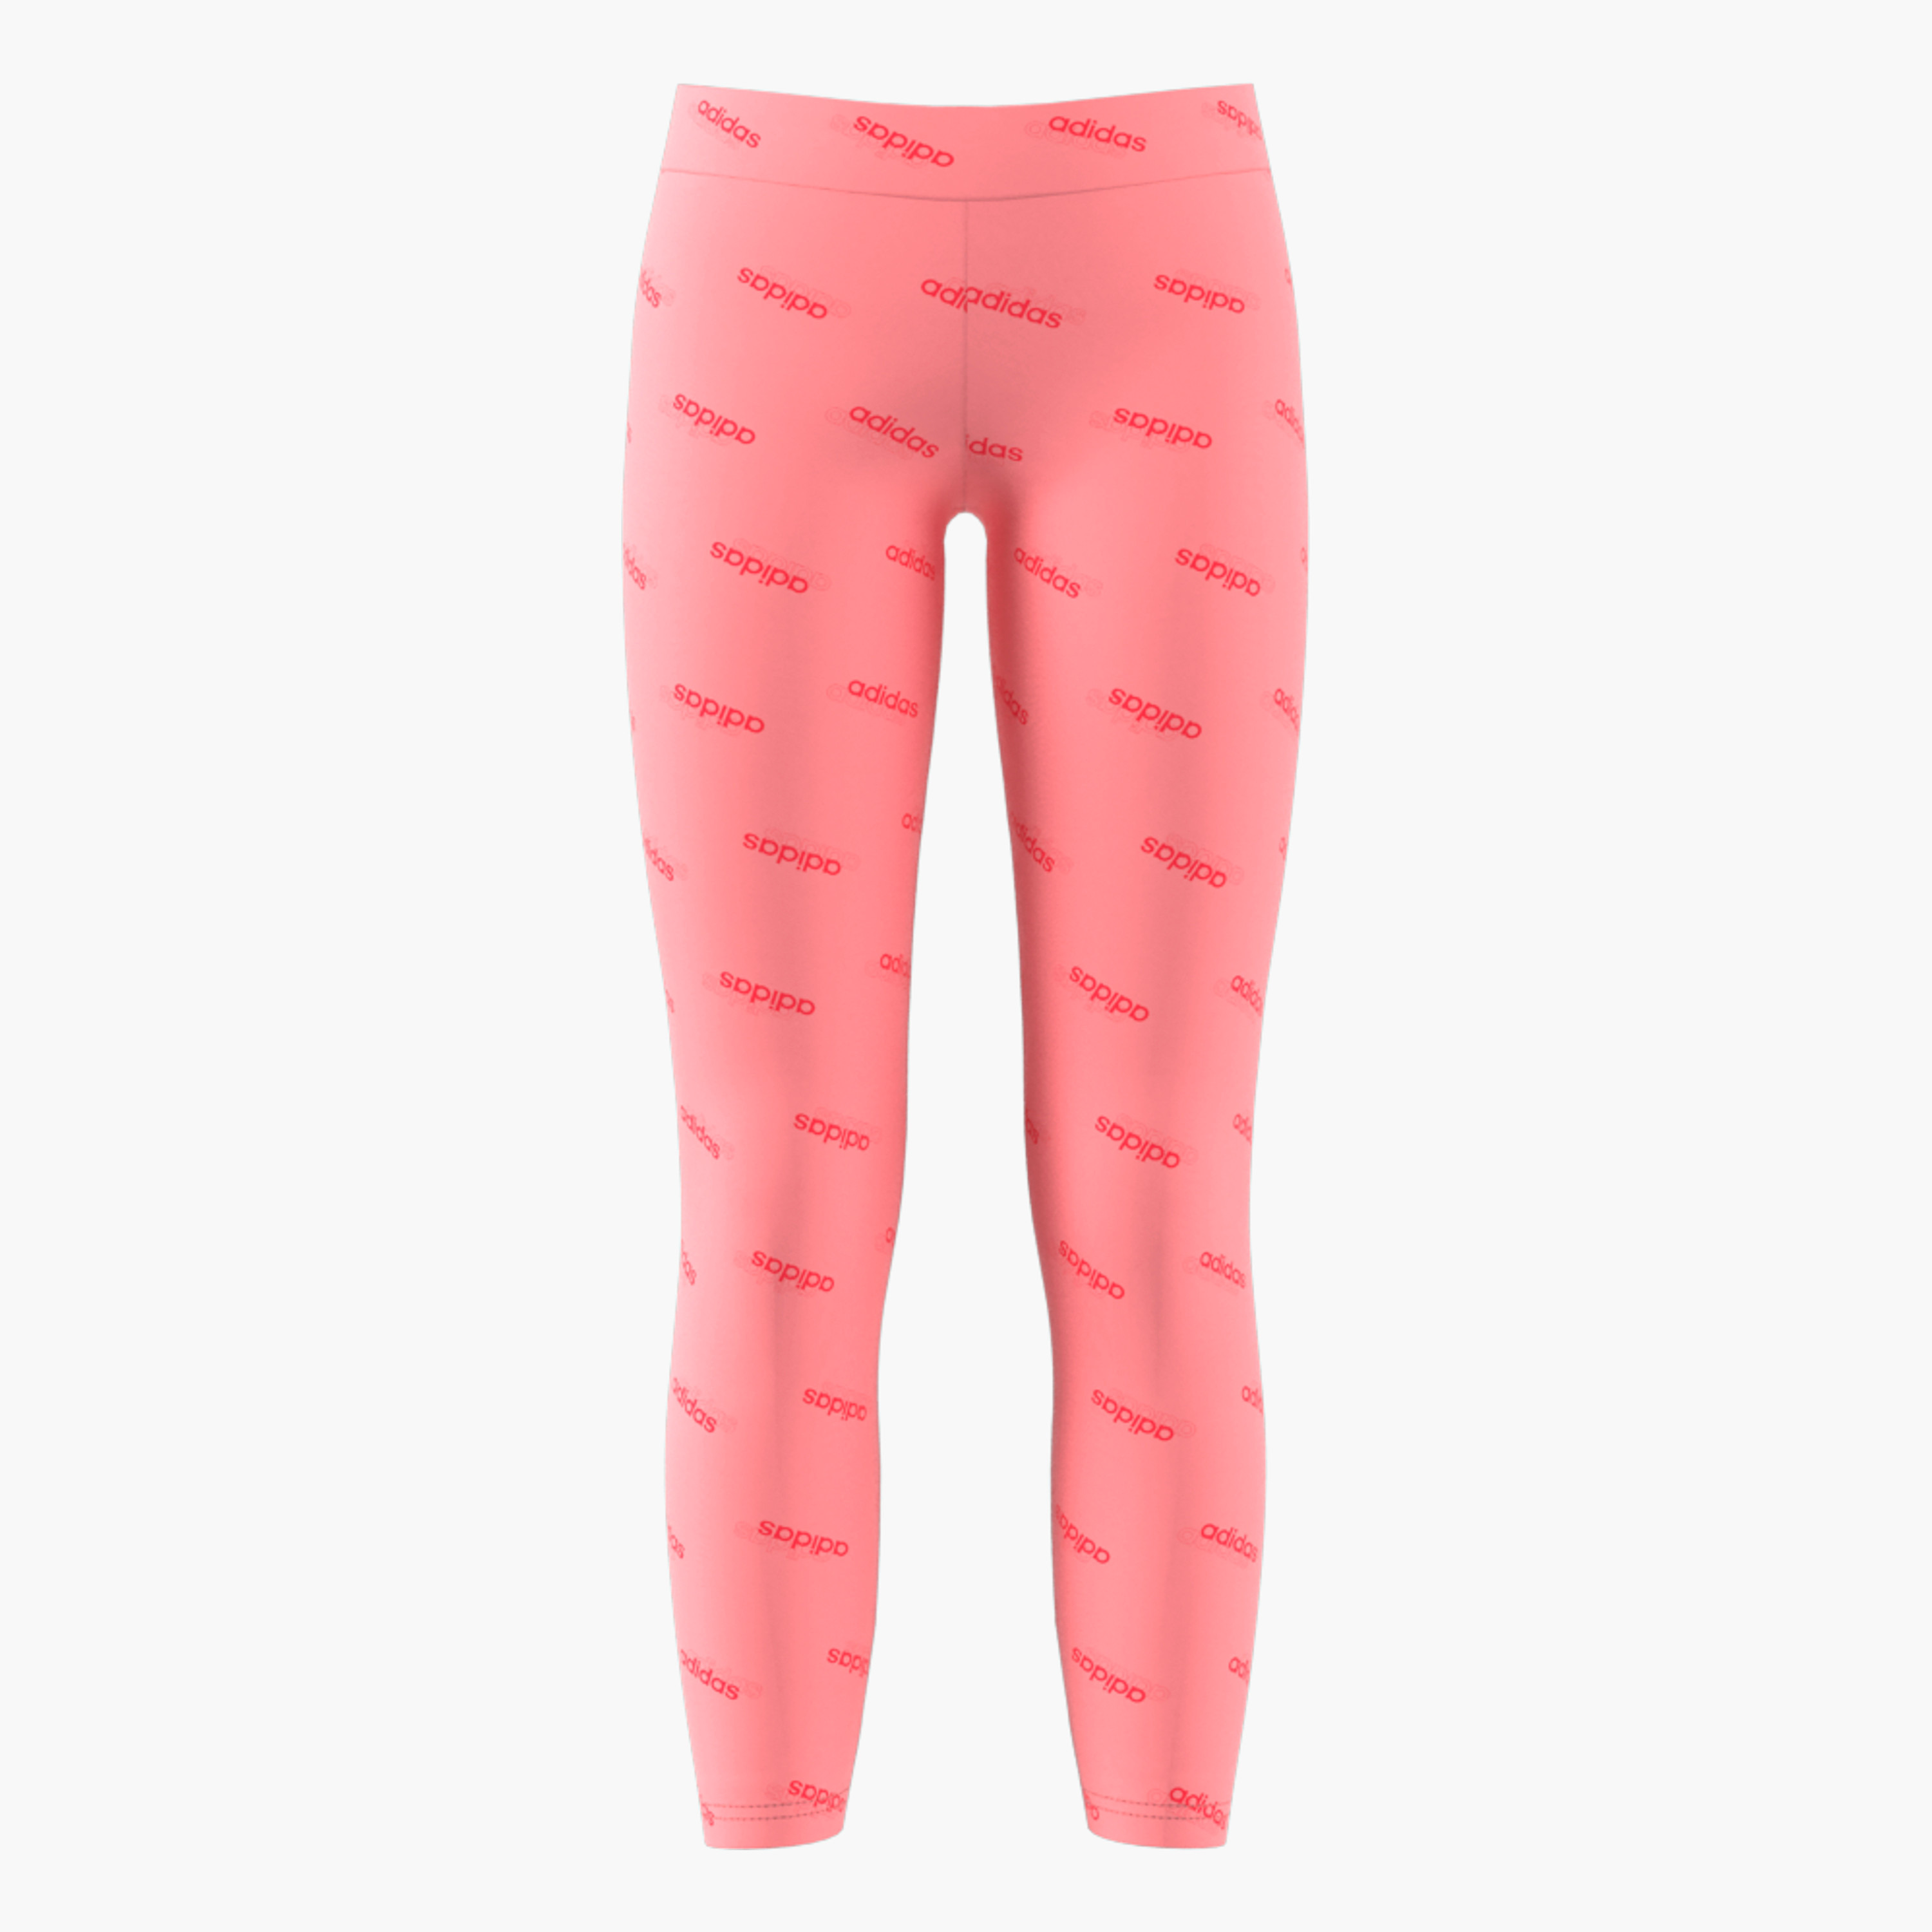 Buy Adidas Leggings for Women Online - Fast Delivery to Azerbaijan.